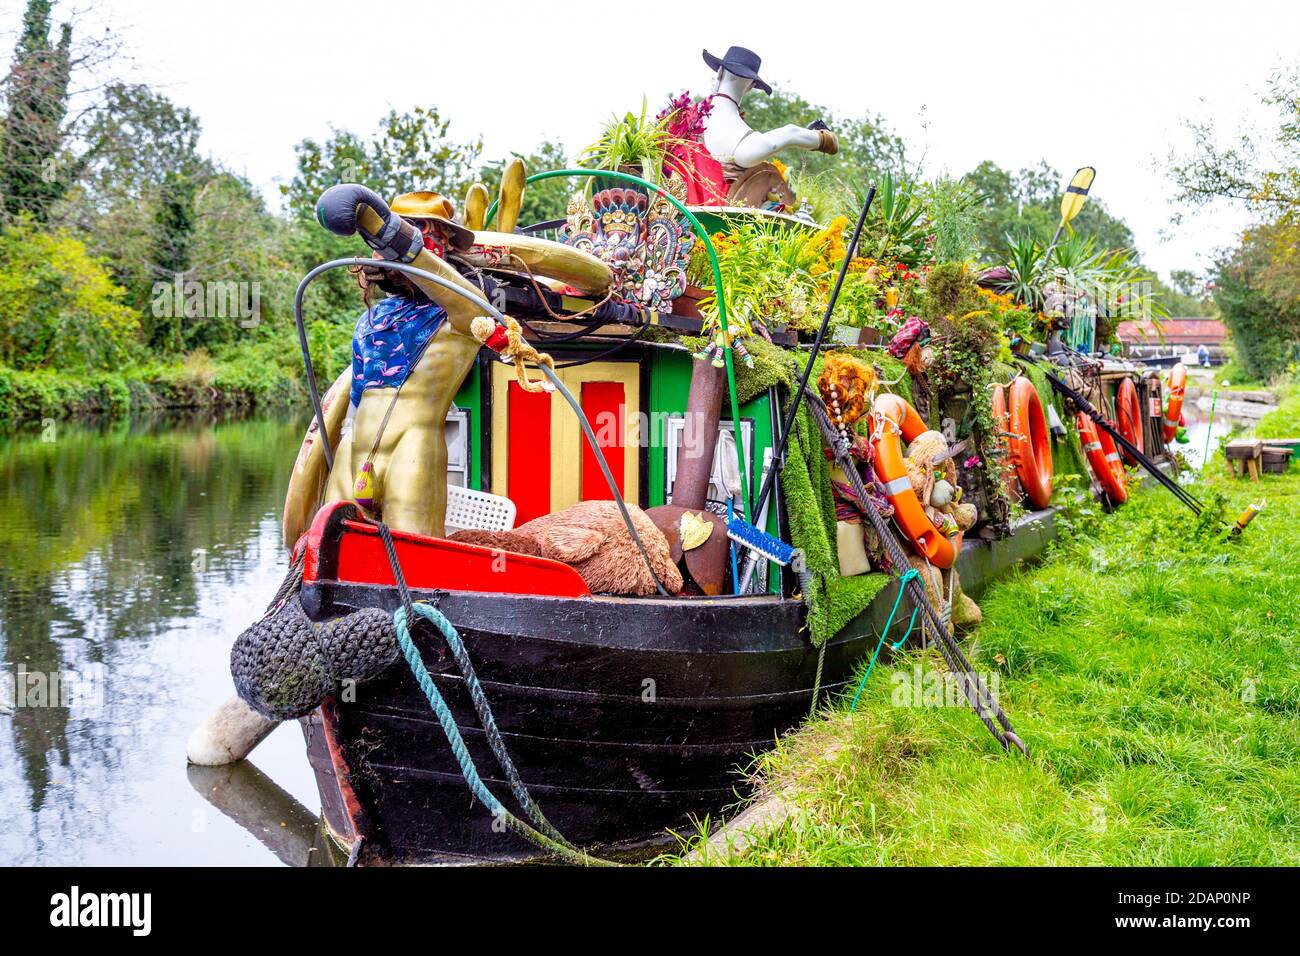 An unusual, decorated barge houseboat along the Grand Union Canal in Colne Valley, Uxbridge, UK Stock Photo